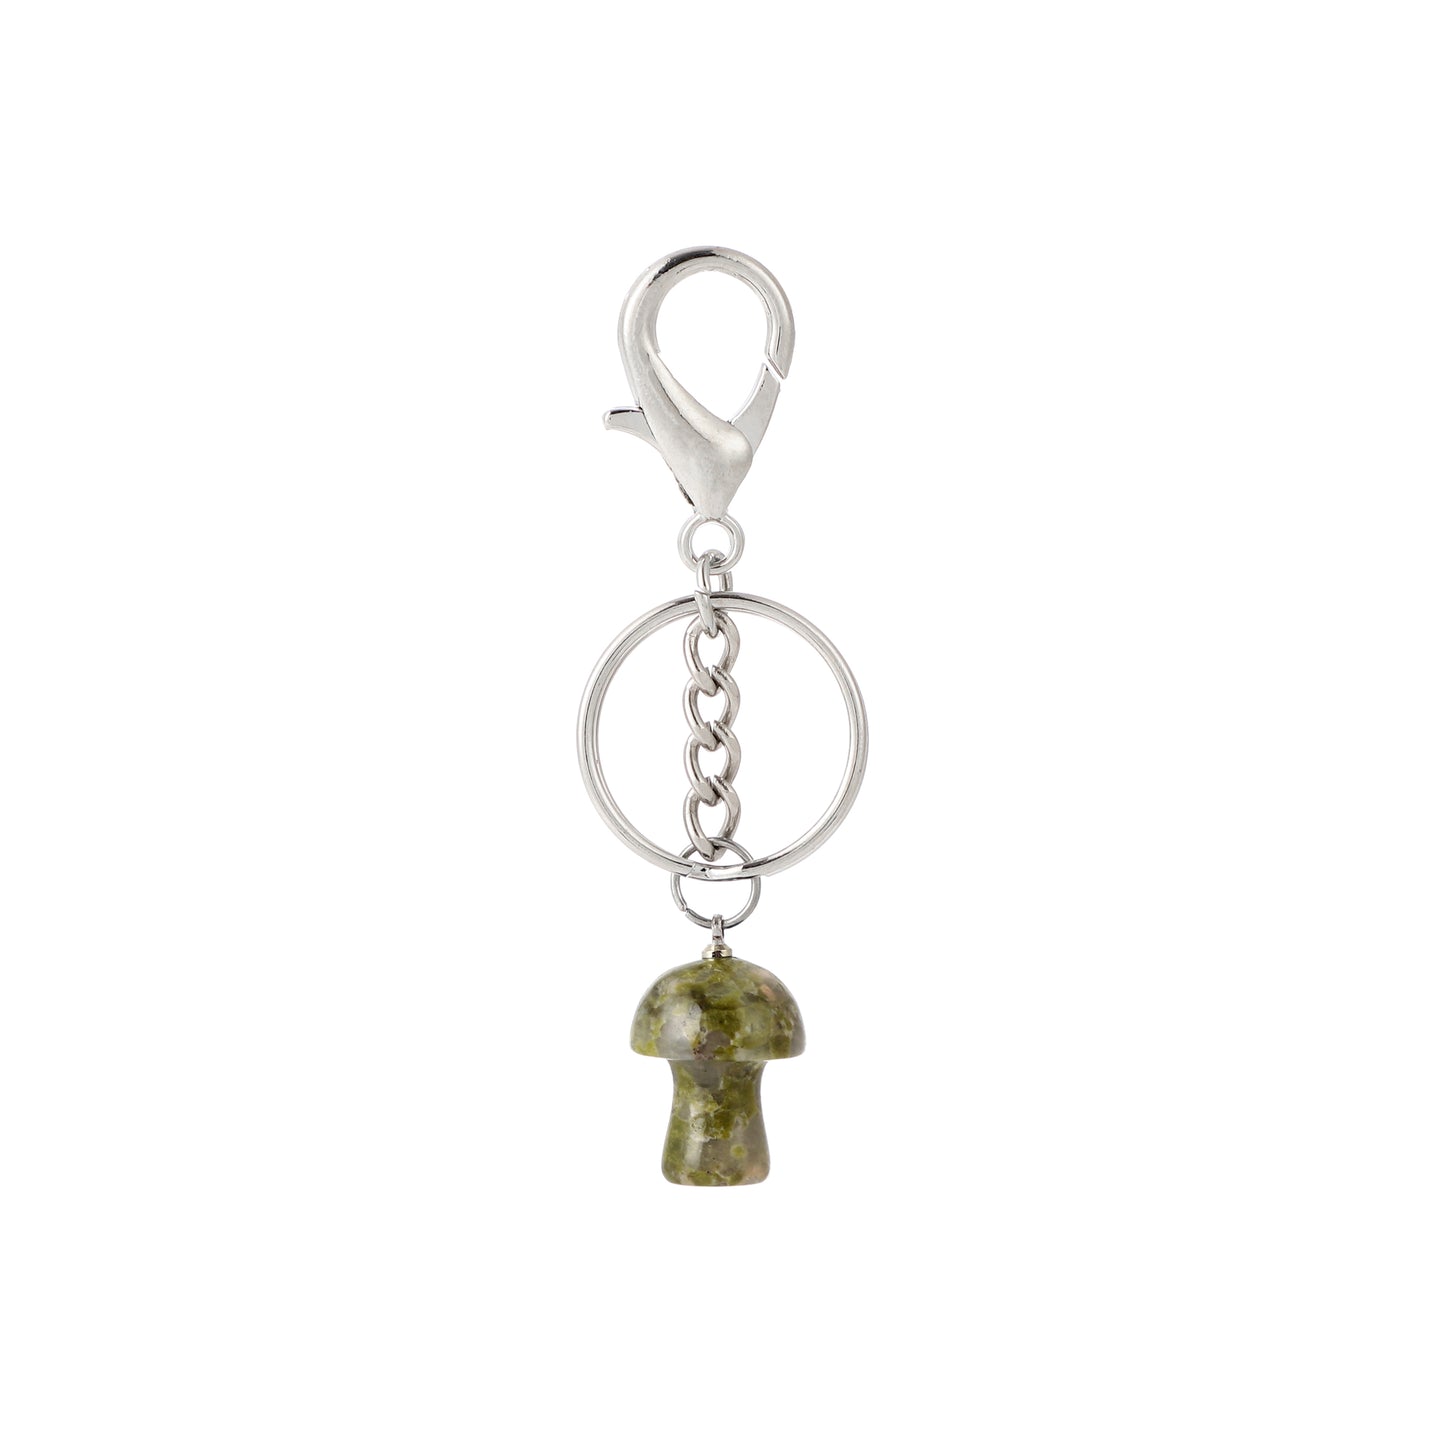 Adorable Mushroom Keychain - Carry Your Keys with Style and Whimsy